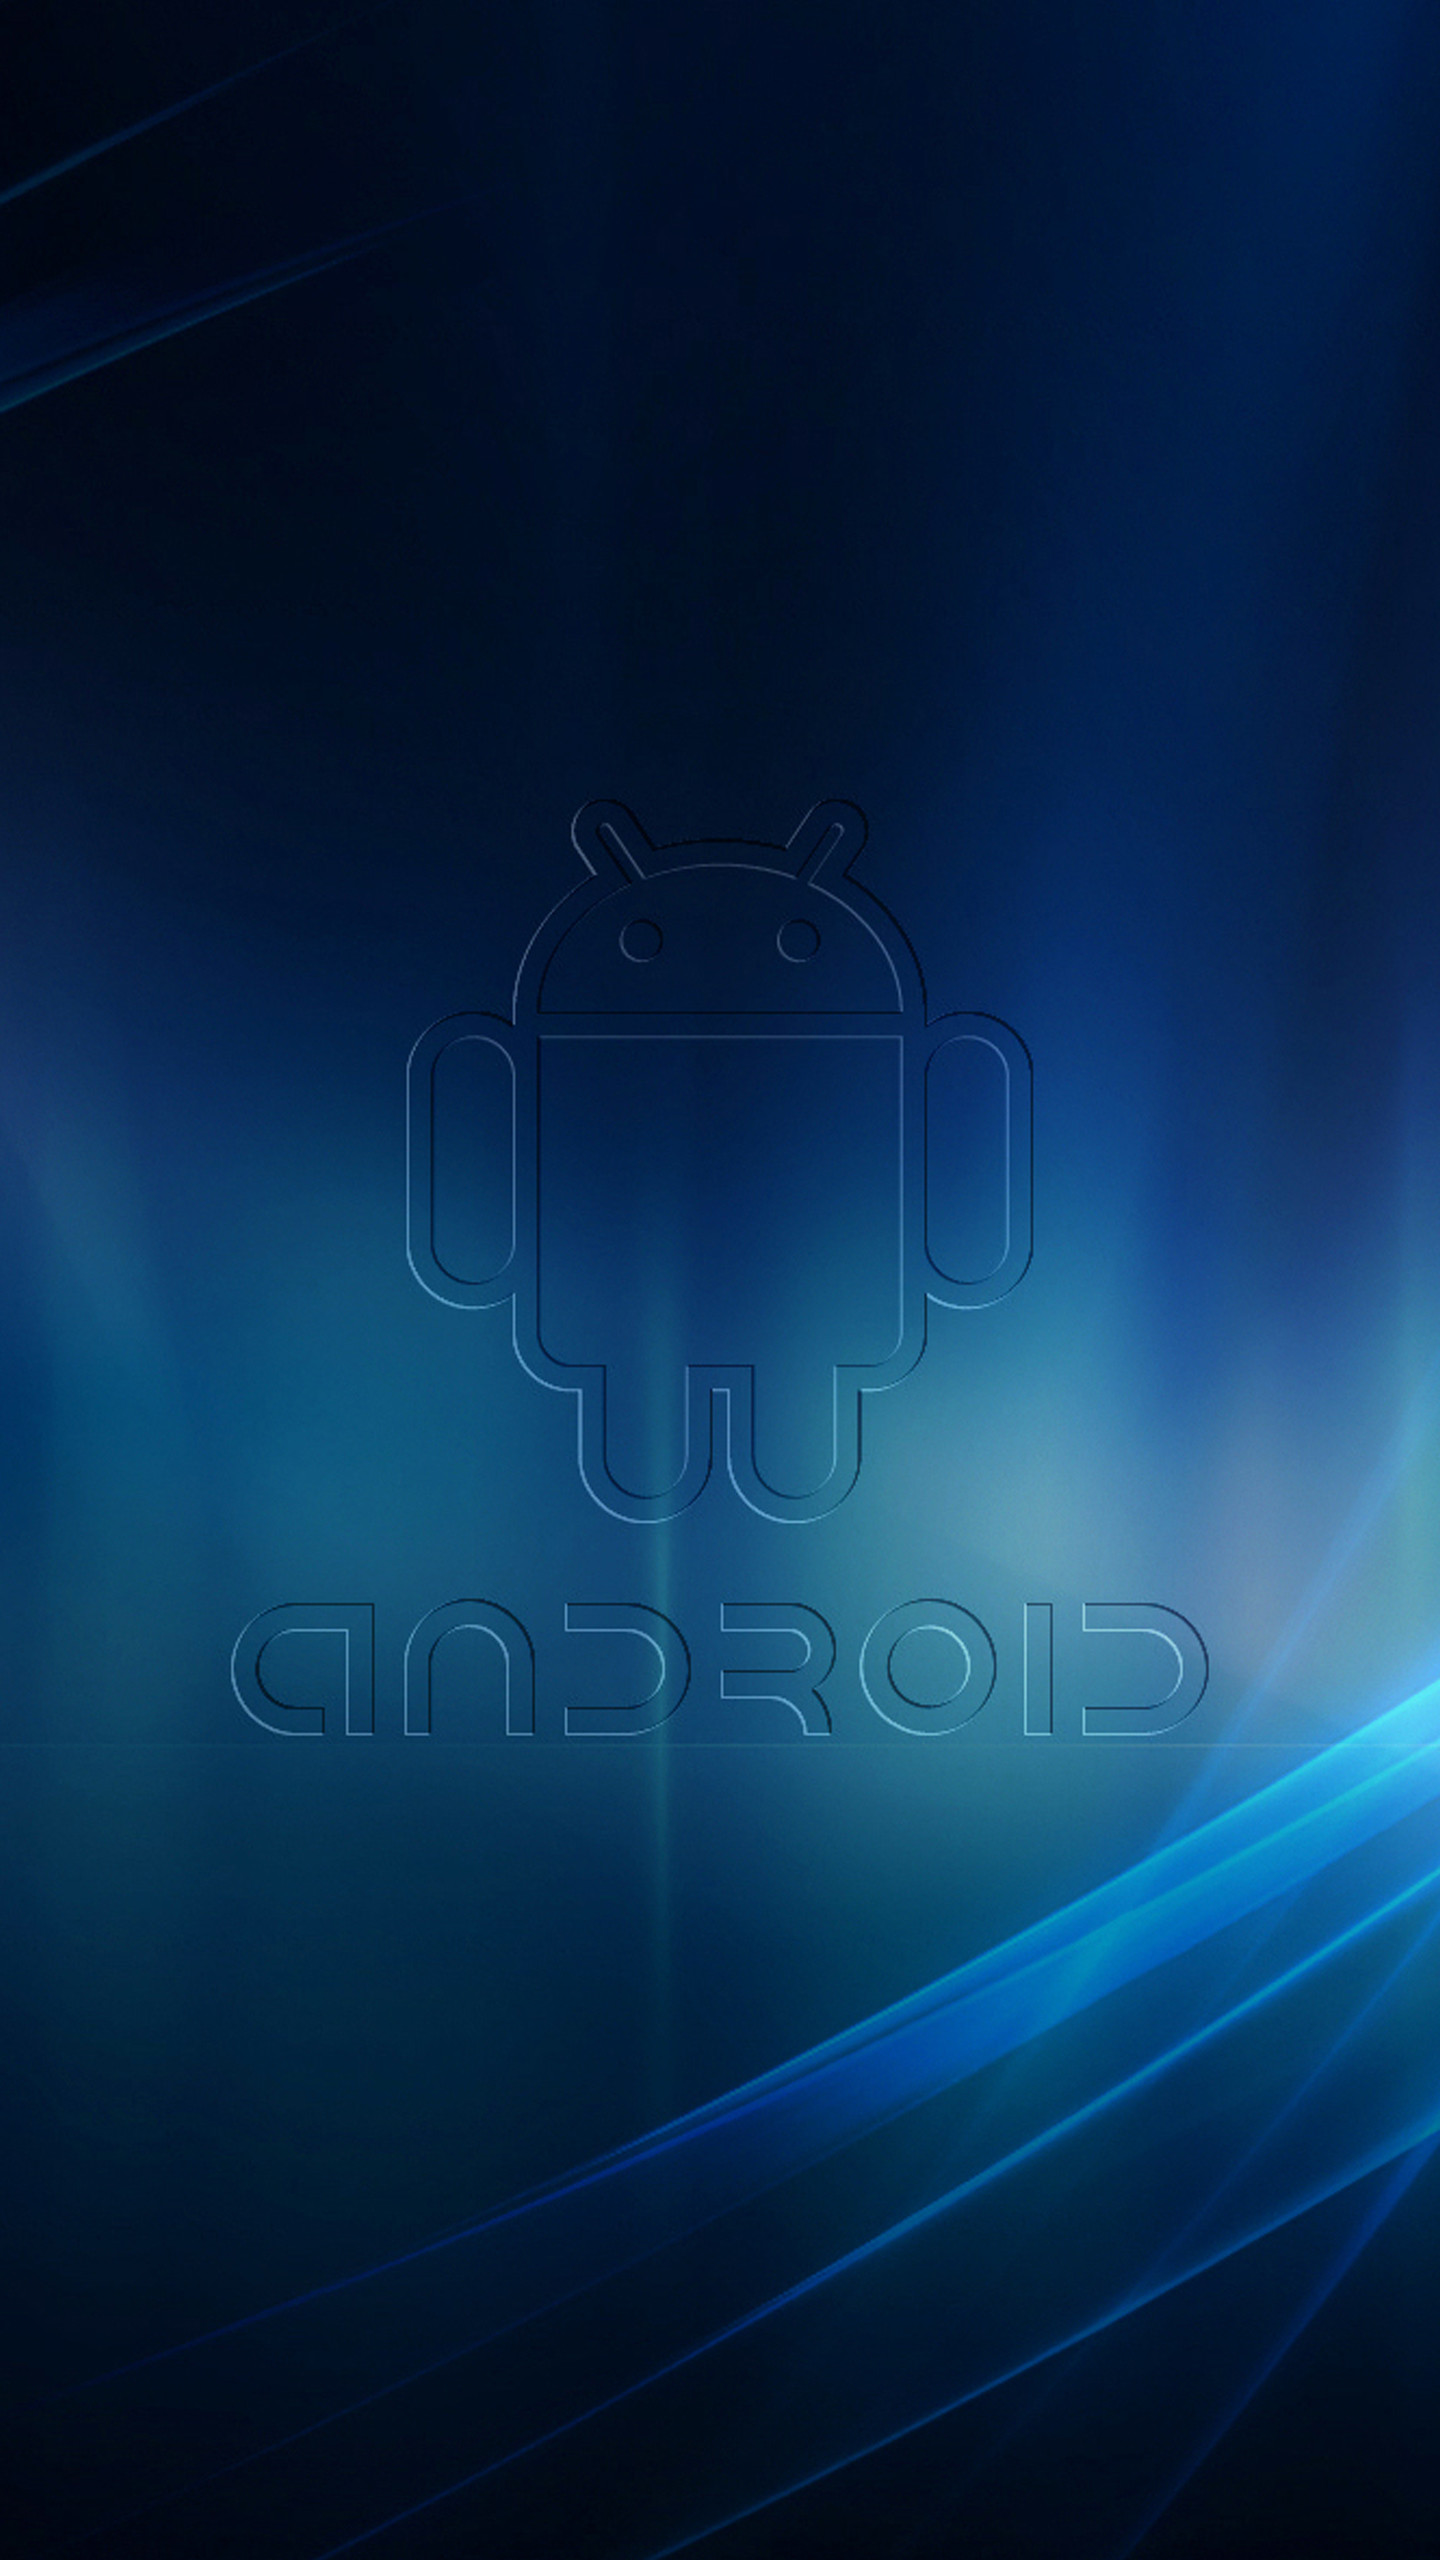 1440x2560 tablet Galaxy Note 4 Wallpapers, Samsung Galaxy Note 4 Wallpaper .